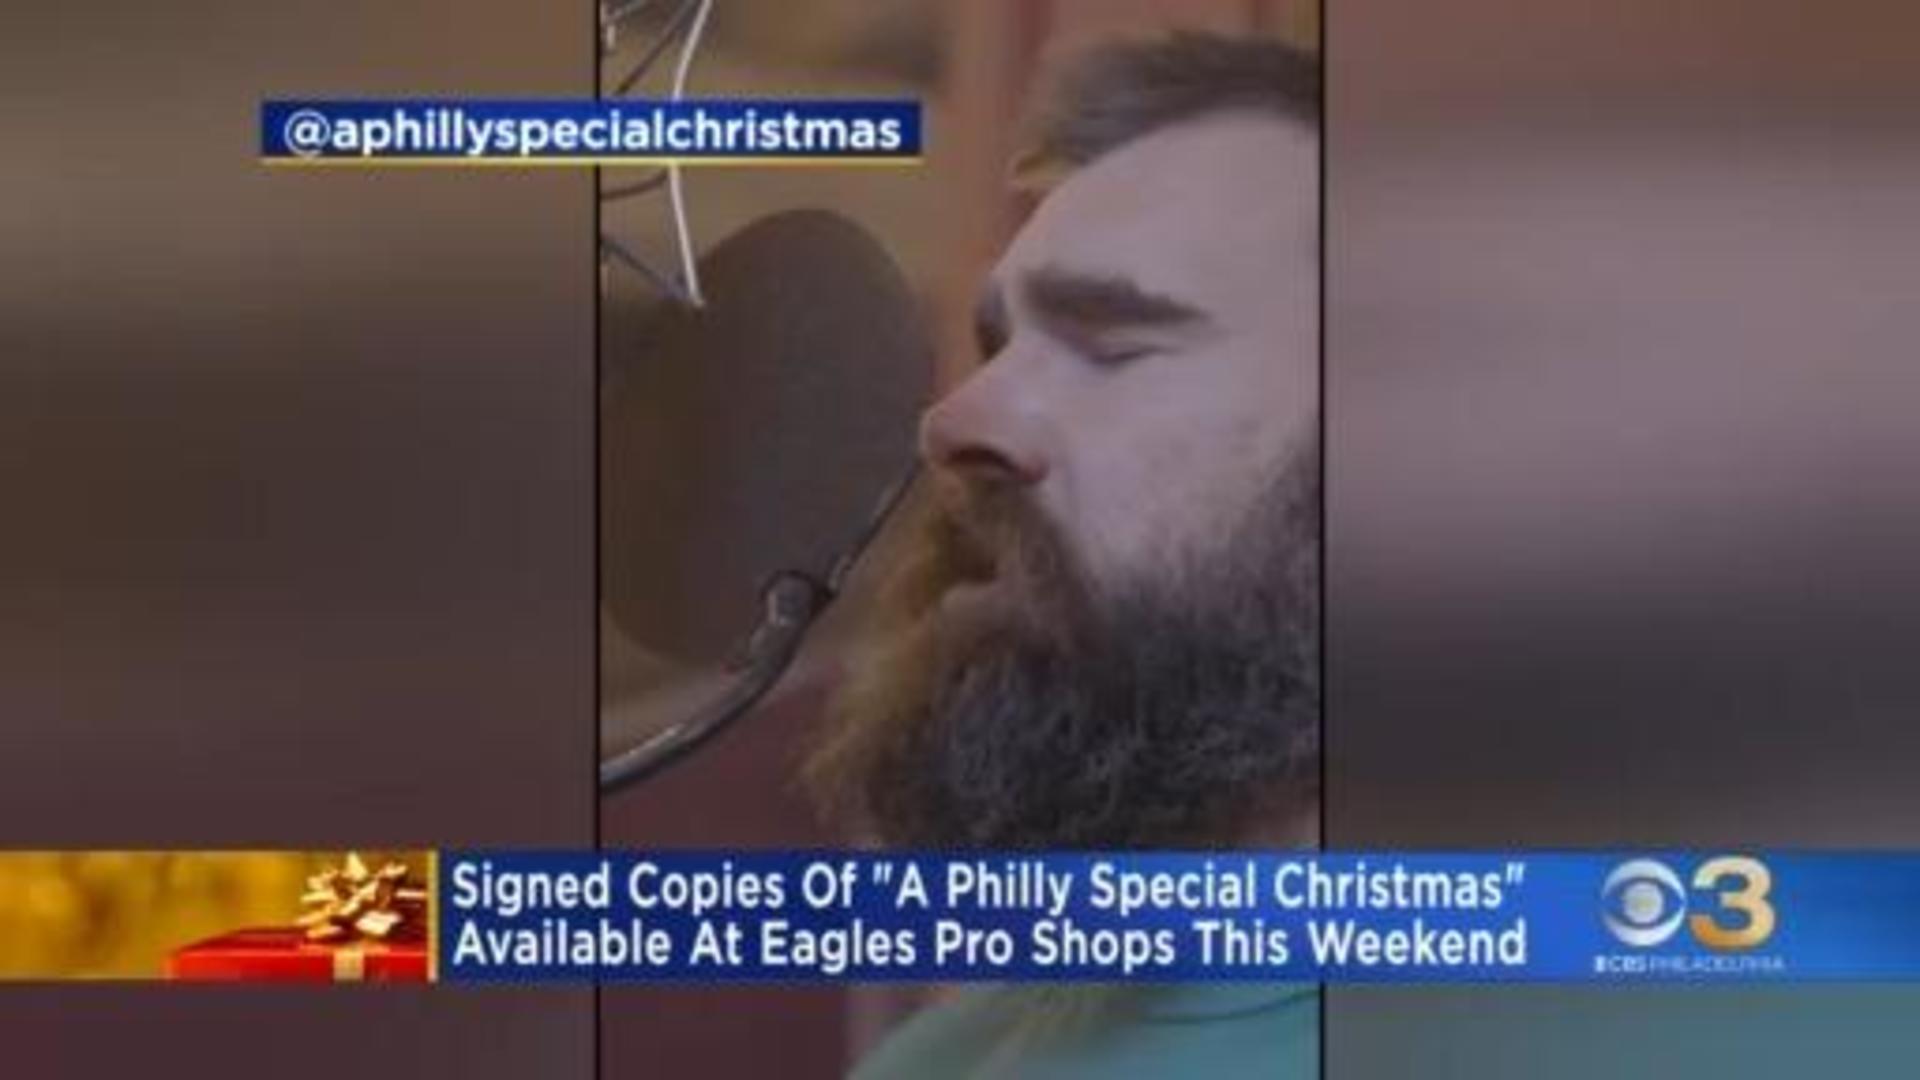 How to get signed copies of Eagles' 'A Philly Special Christmas